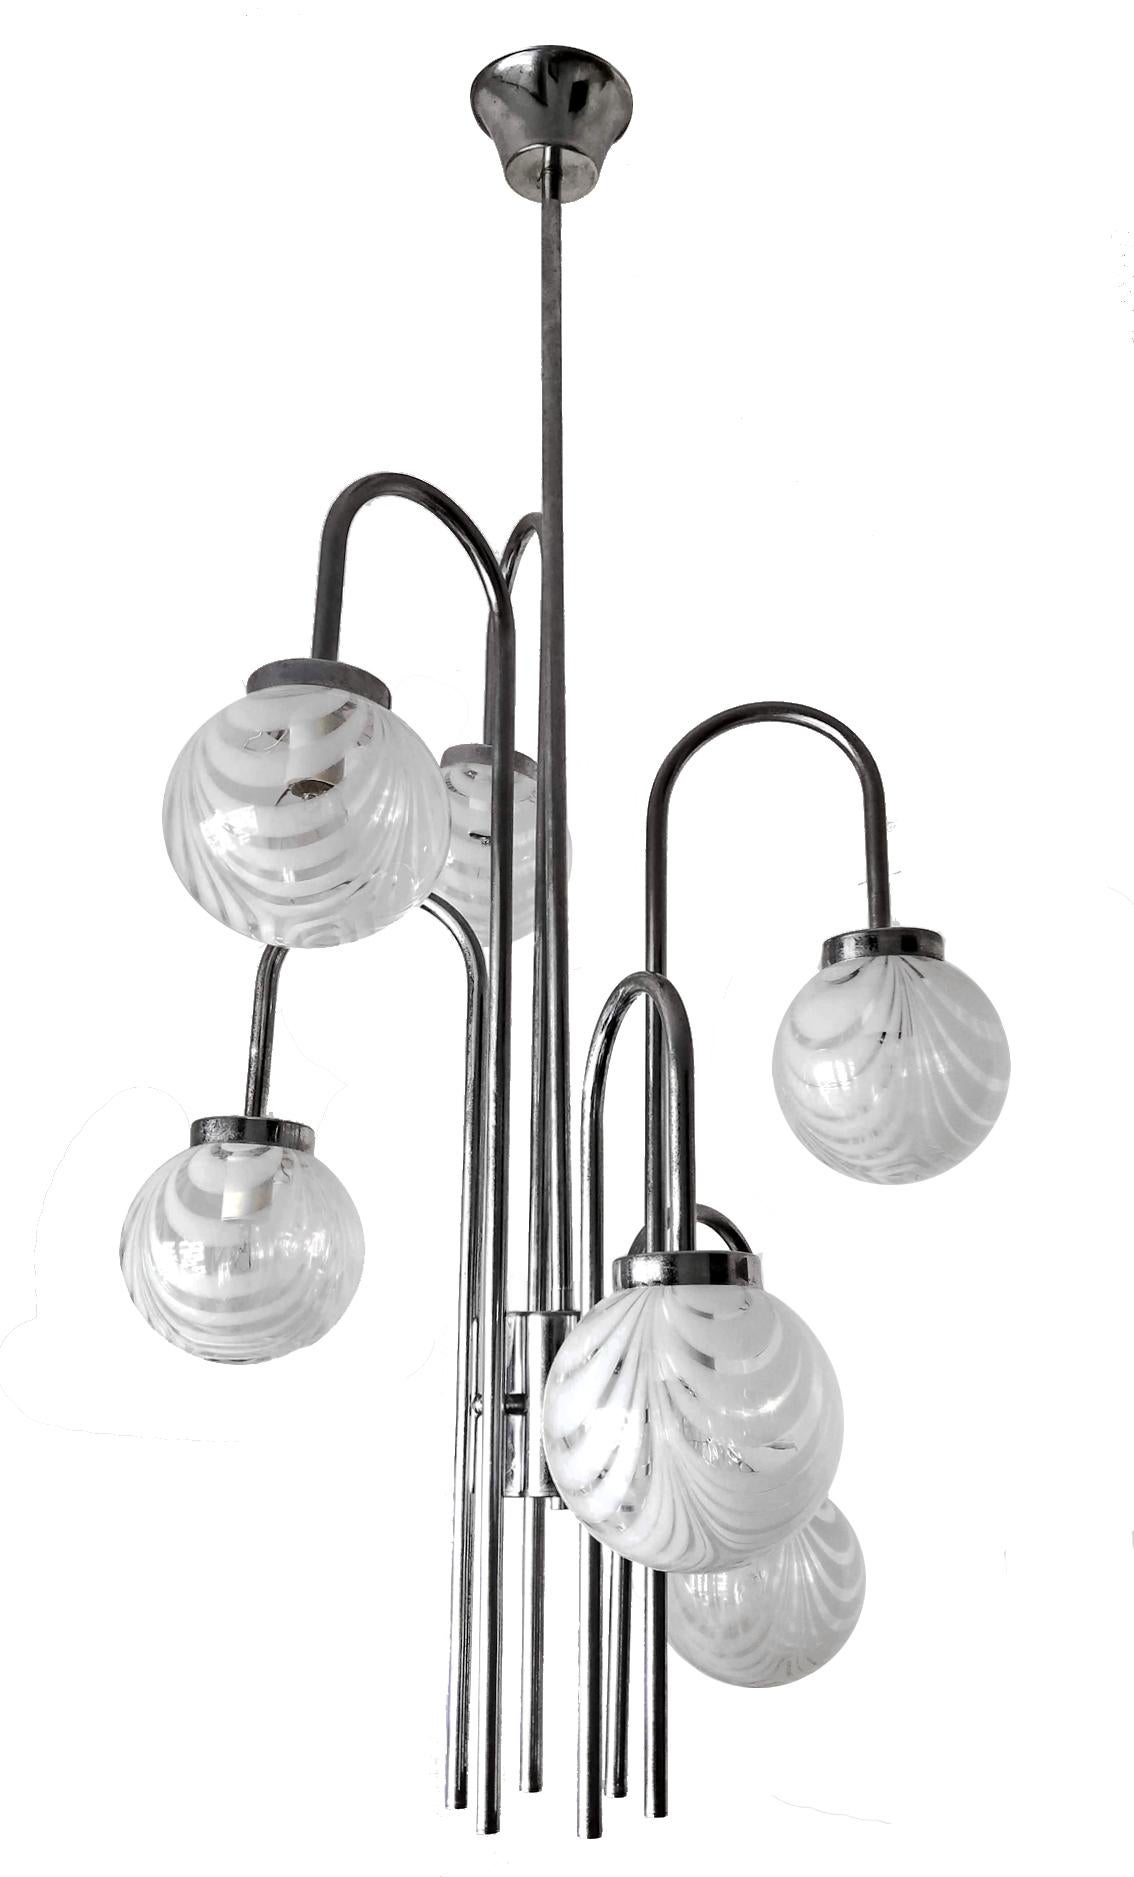 Vintage midcentury 1960s Italian Space Age chrome Cascade six-light pendant ceiling lamp/ white hand blown art glass globes.
Measures:
Diameter 20 in/ 50 cm
Height 47.3 in/ 120 cm
Weight: 5 Kg / 25 lb/ each
Six-light bulbs E-14 / good working